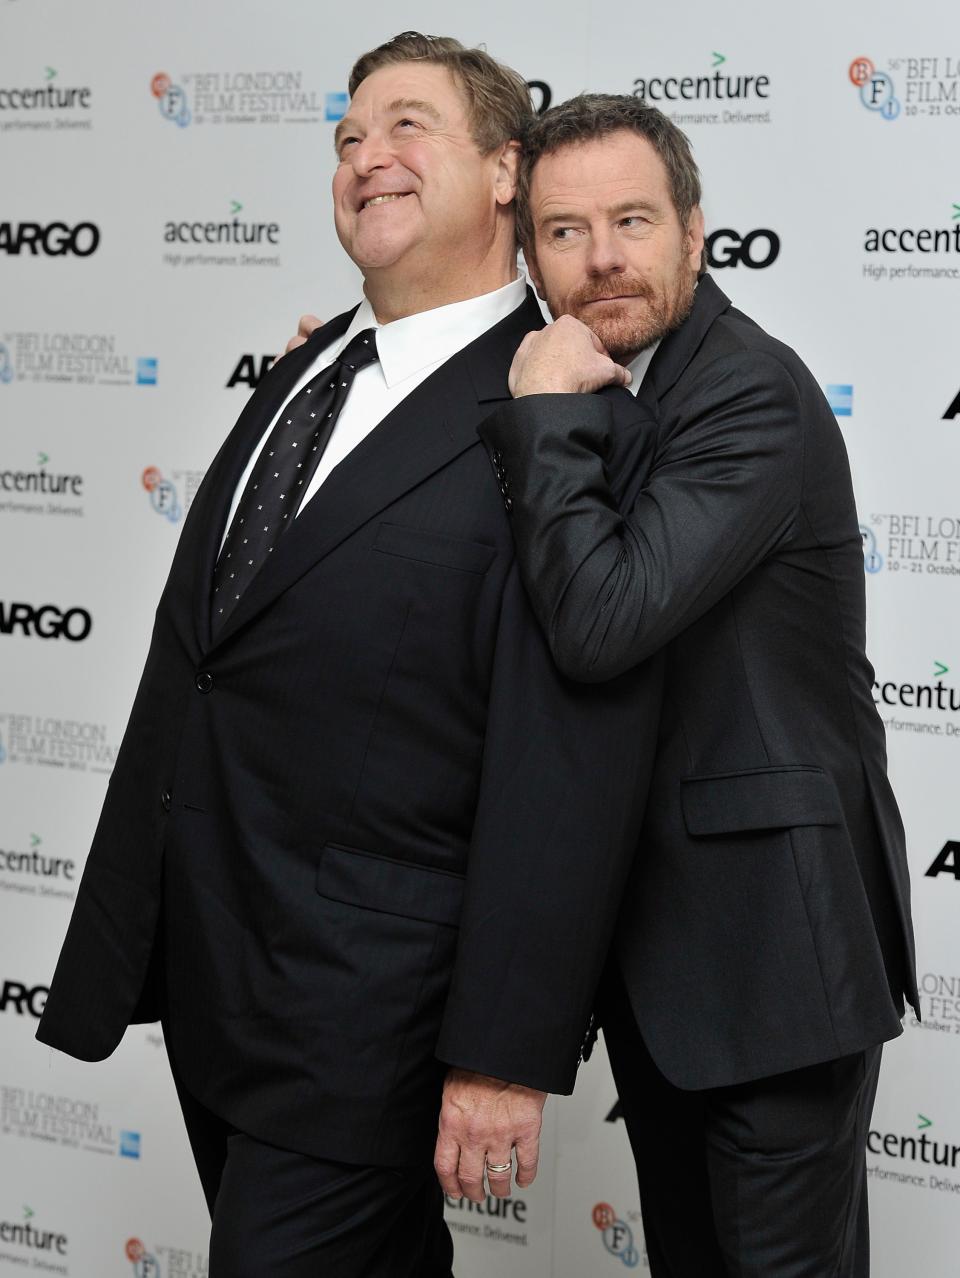 LONDON, ENGLAND - OCTOBER 17: Actors John Goodman and Bryan Cranston attend the "Argo" premiere during the 56th BFI London Film Festival at the Odeon Leicester Square on October 17, 2012 in London, England. (Photo by Gareth Cattermole/Getty Images for BFI)